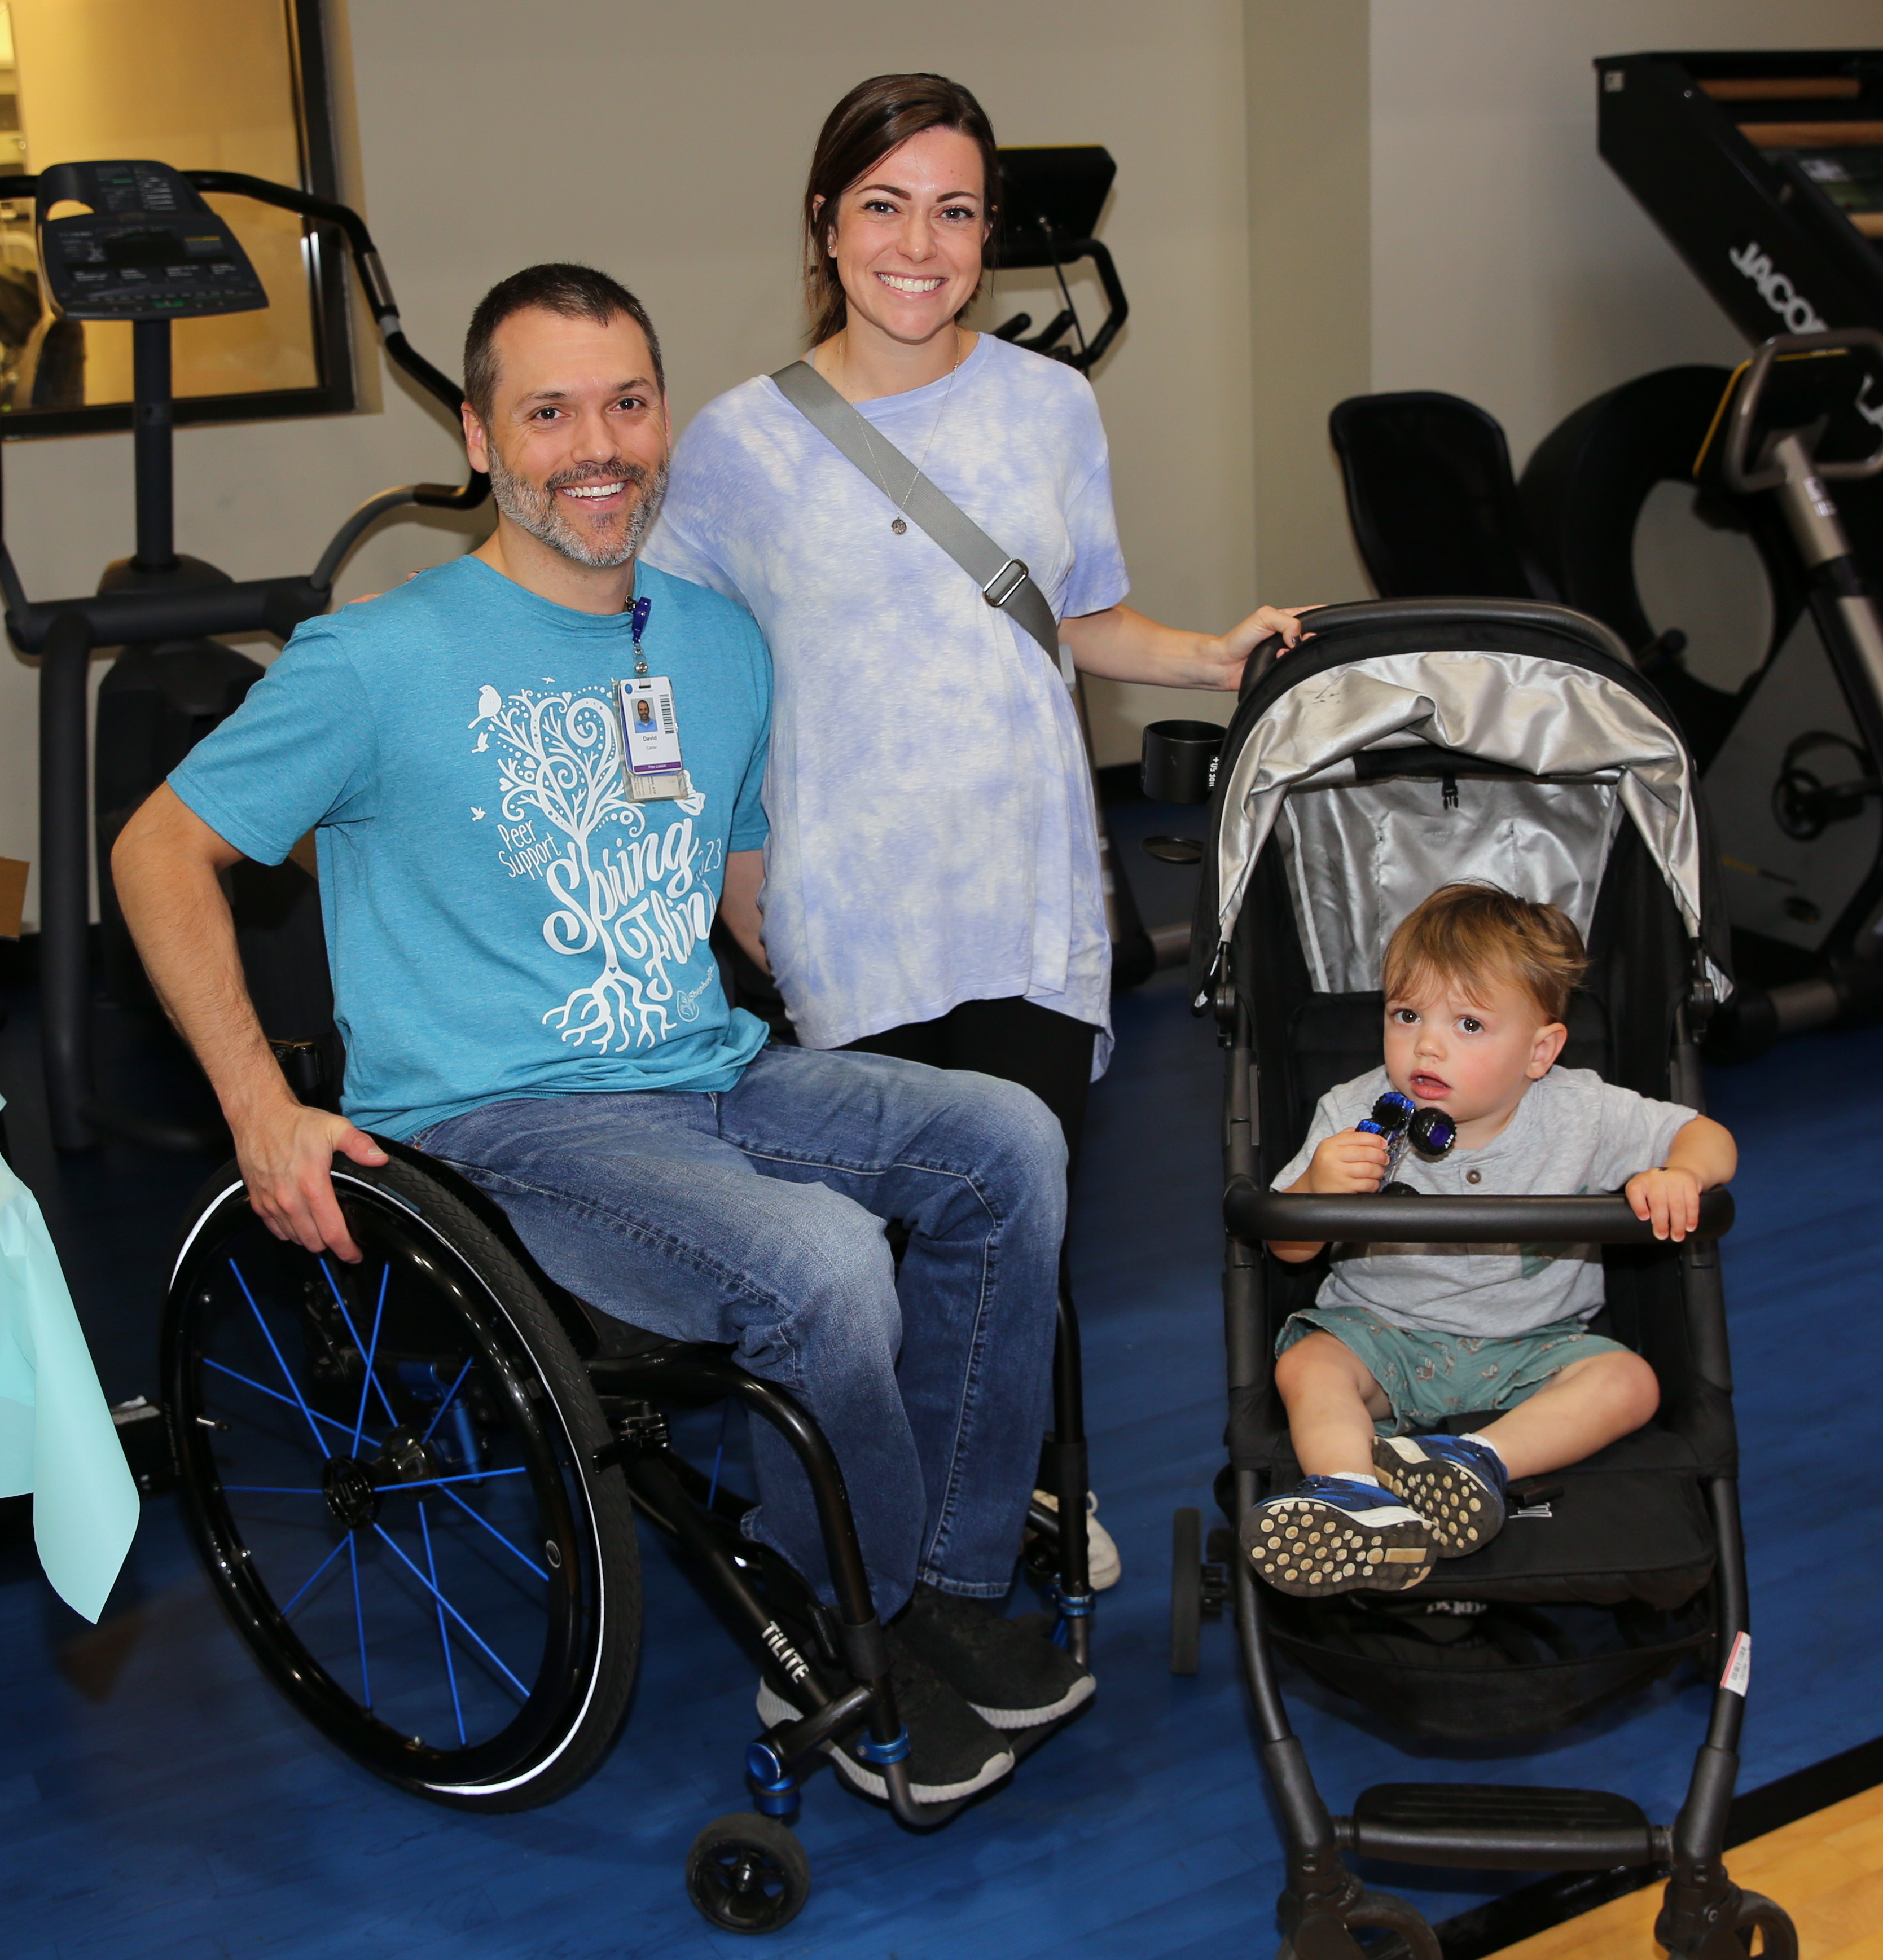 Man in wheelchair with woman and their child in a stroller at a peer support community function